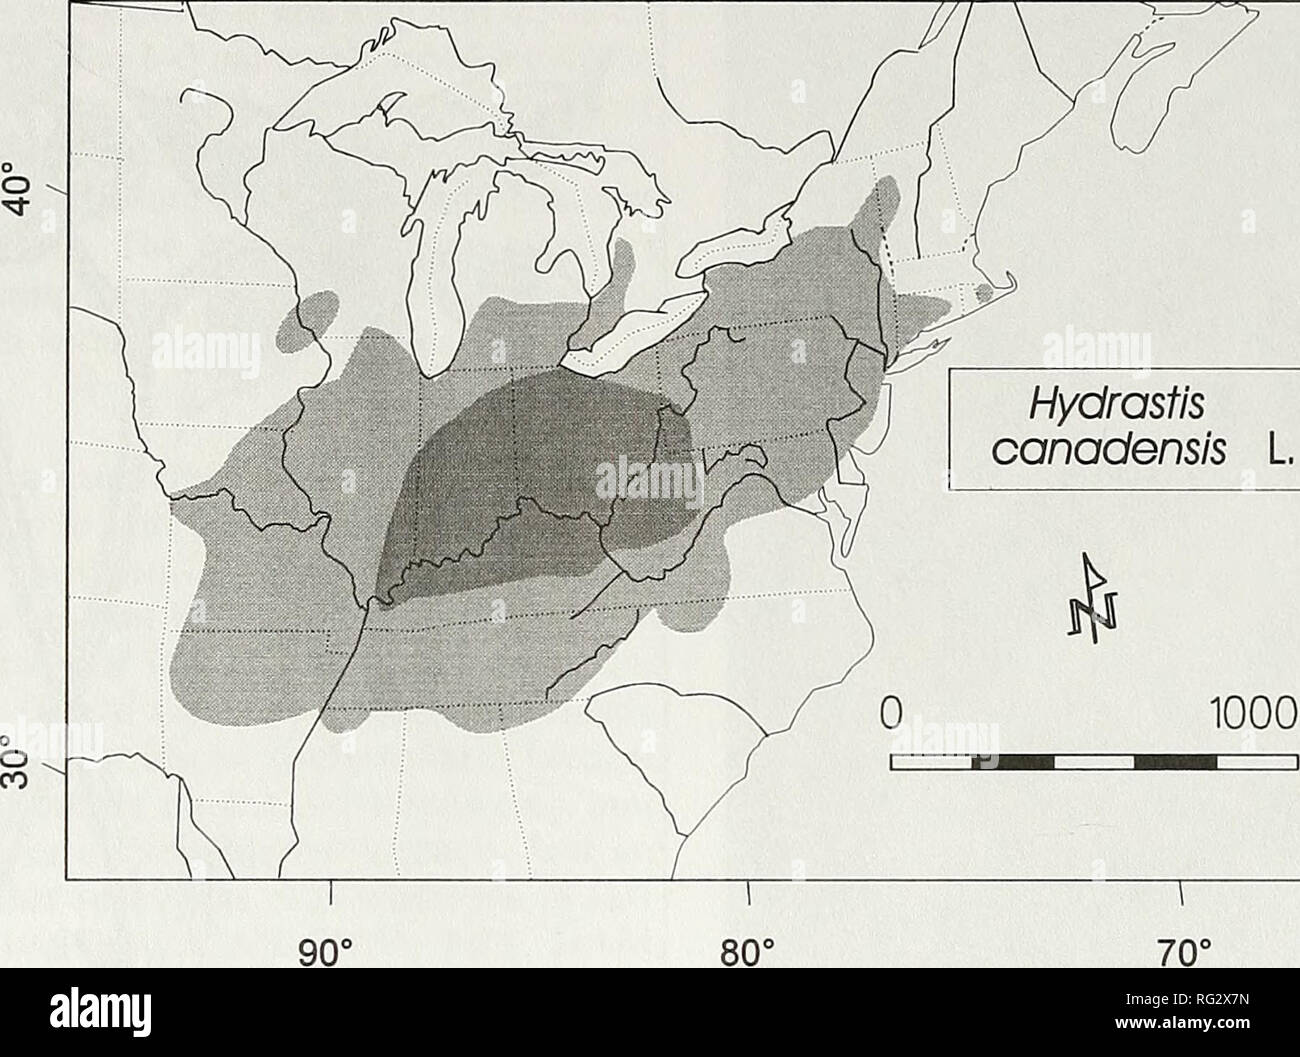 . The Canadian field-naturalist. 114 The Canadian Field-Naturalist Vol. 114. 1000 km Figure 3. Distribution of Goldenseal (Hydrastis canadensis, L.) in North America adapted from Catling and Small (1994) and originally based on Lloyd and Lloyd (1908); Radford, et al. (1964); Crow (1982); Good (1978)*; Porter (1979); Mitchell and Sheviak (1981); and Voss (1985). produced on the rhizome from which a stem grows during the following year. The stem emerges in April, its leaves unfold, and flowers open during stem elongation and leaf expansion in late April and May in southwestern Ontario. The flowe Stock Photo